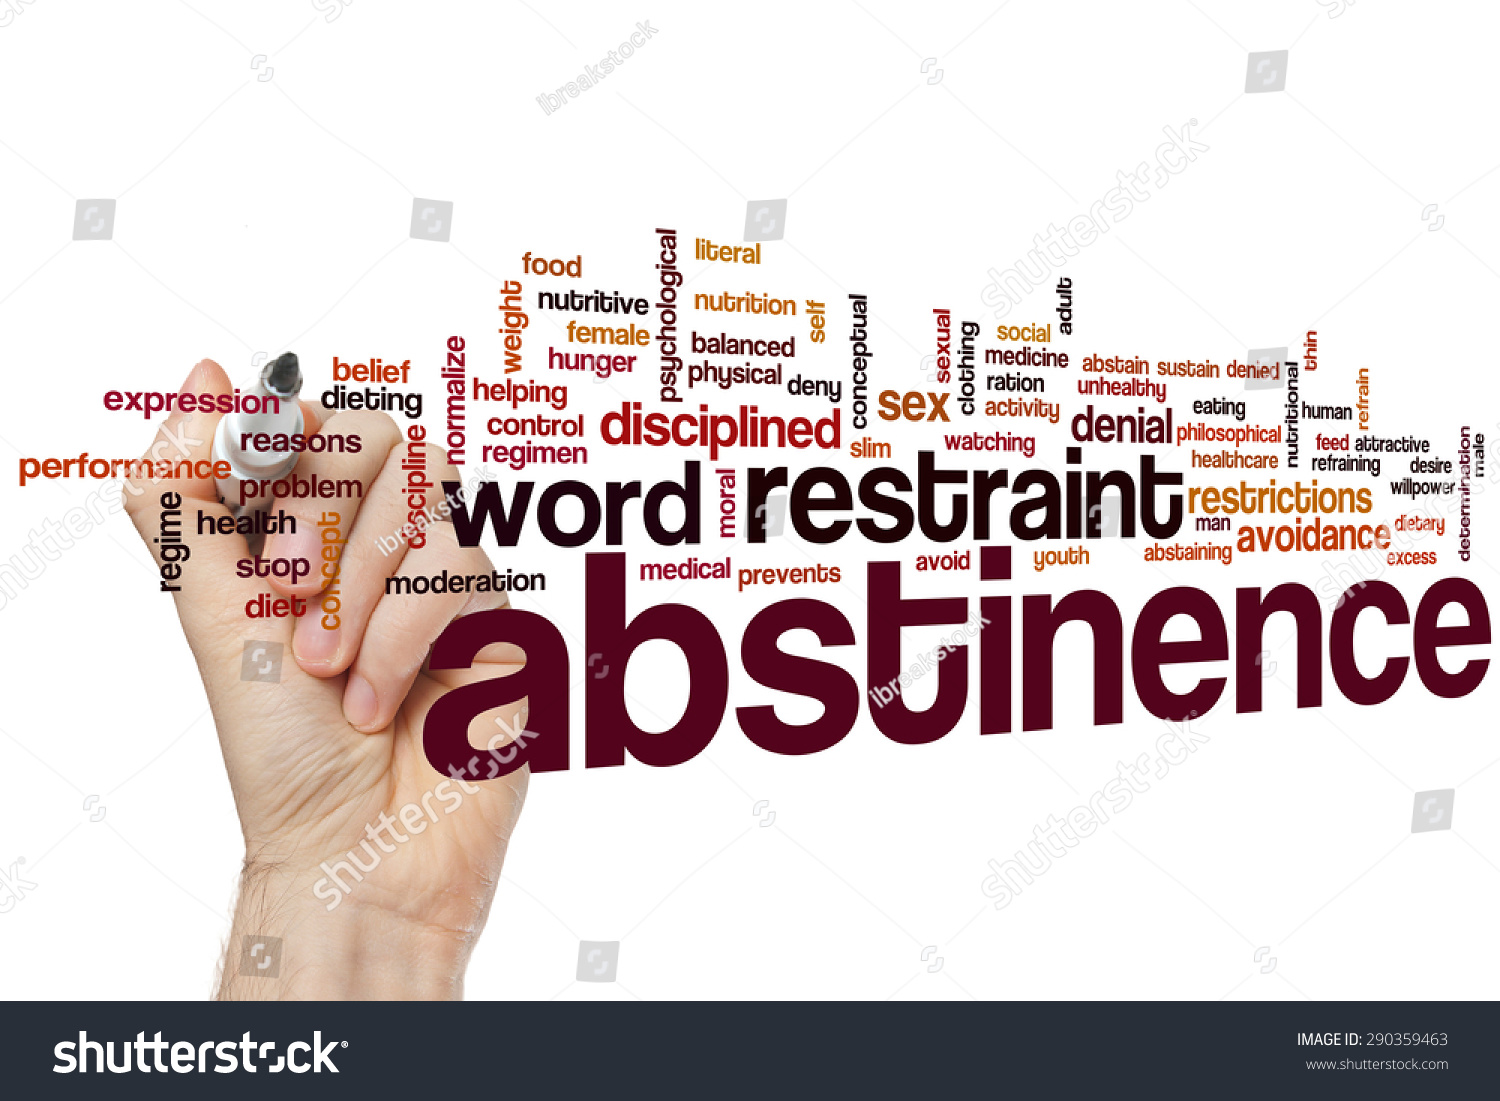 Abstinence word cloud concept #290359463